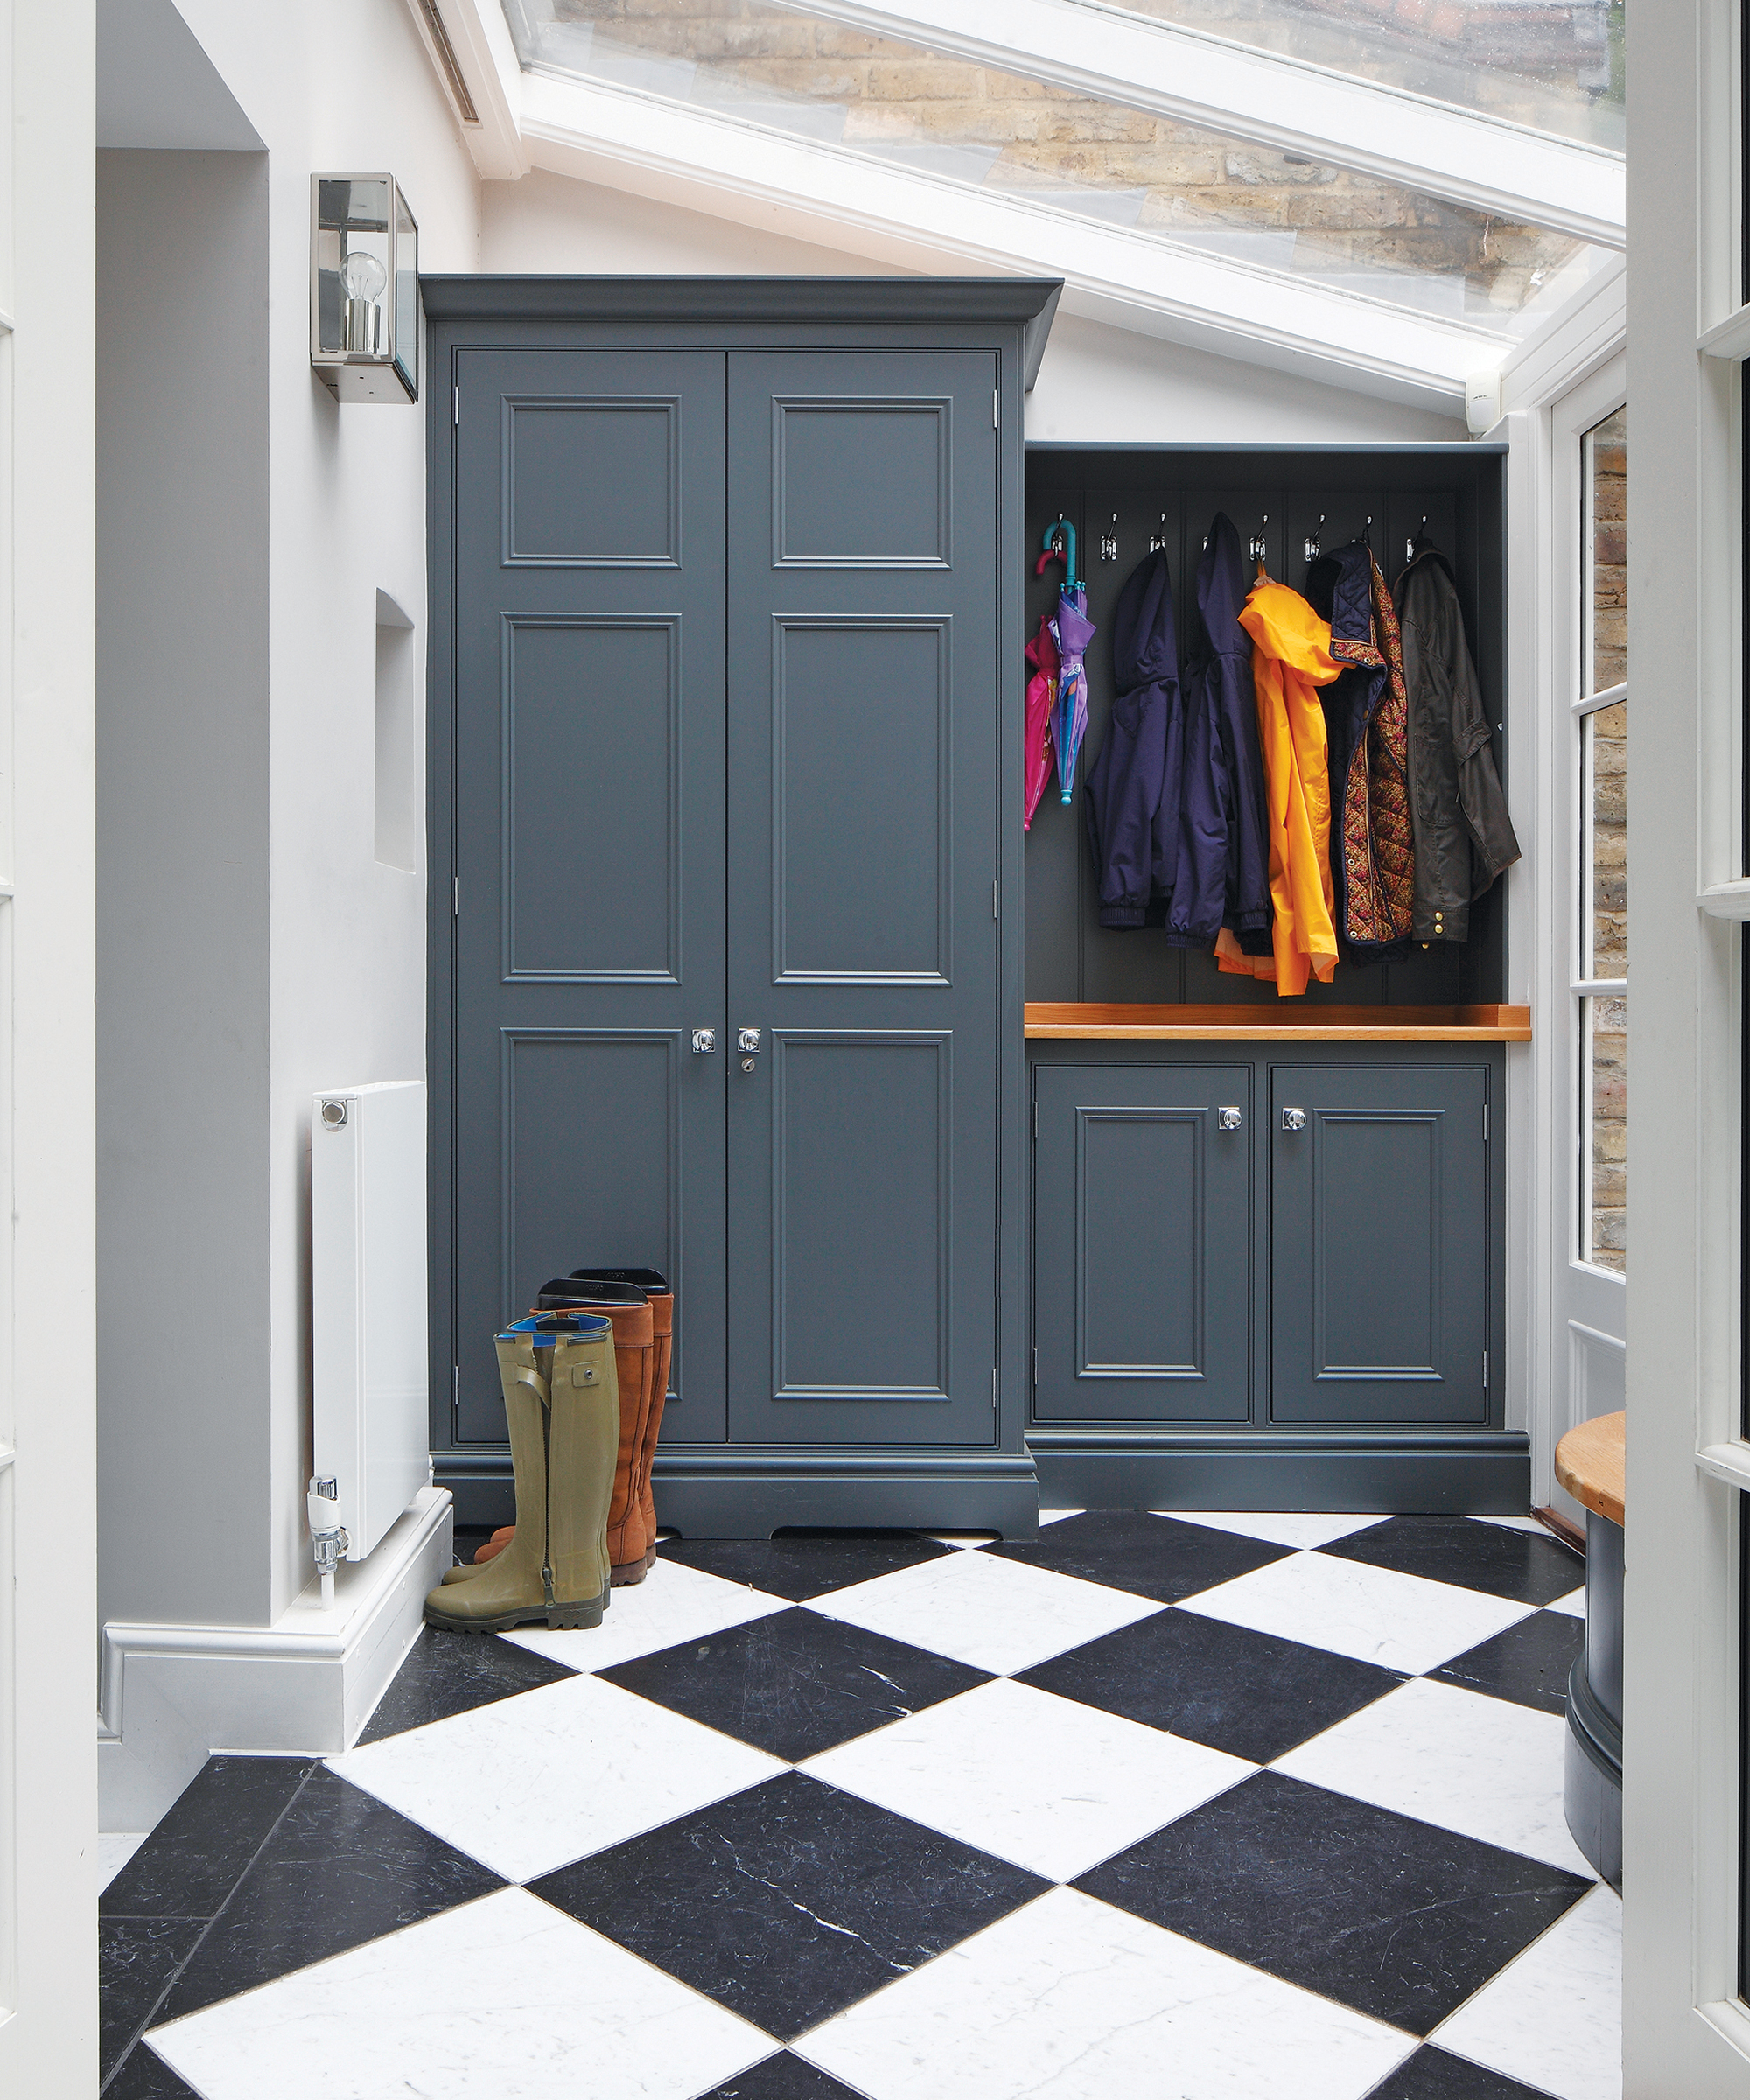 A mudroom with checkered floors and a blue closed cabinetry unit